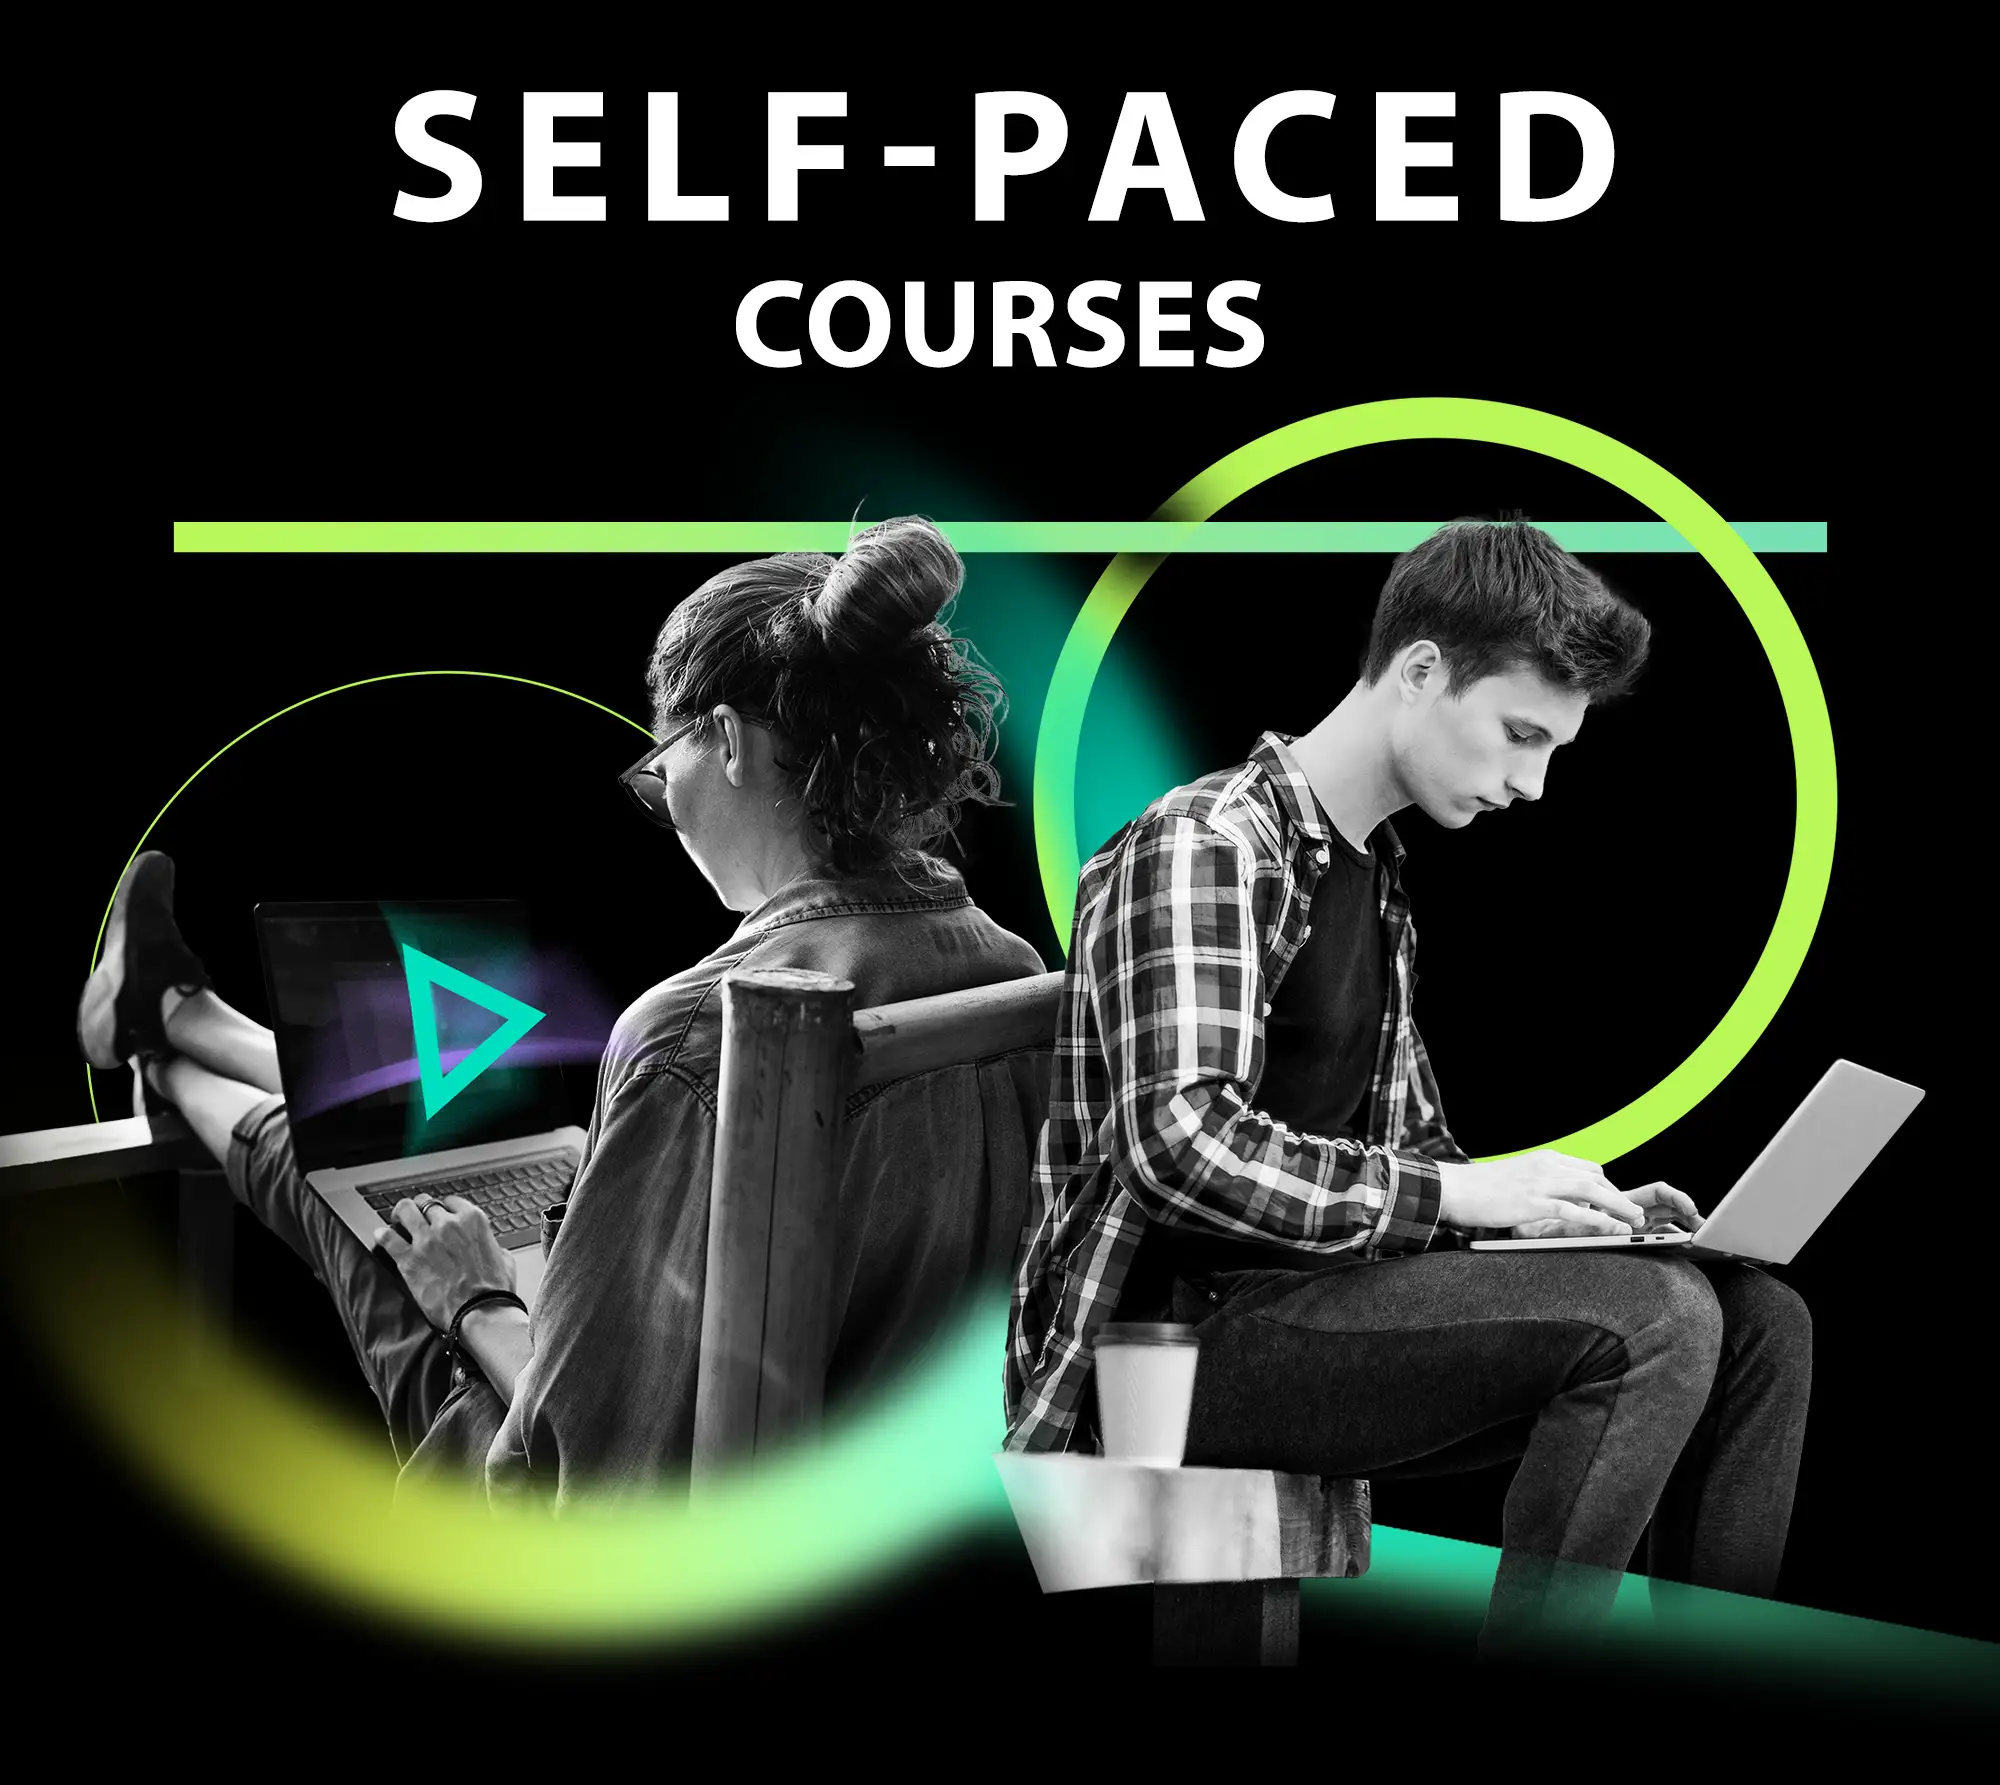 Self-Paced Courses - image collage